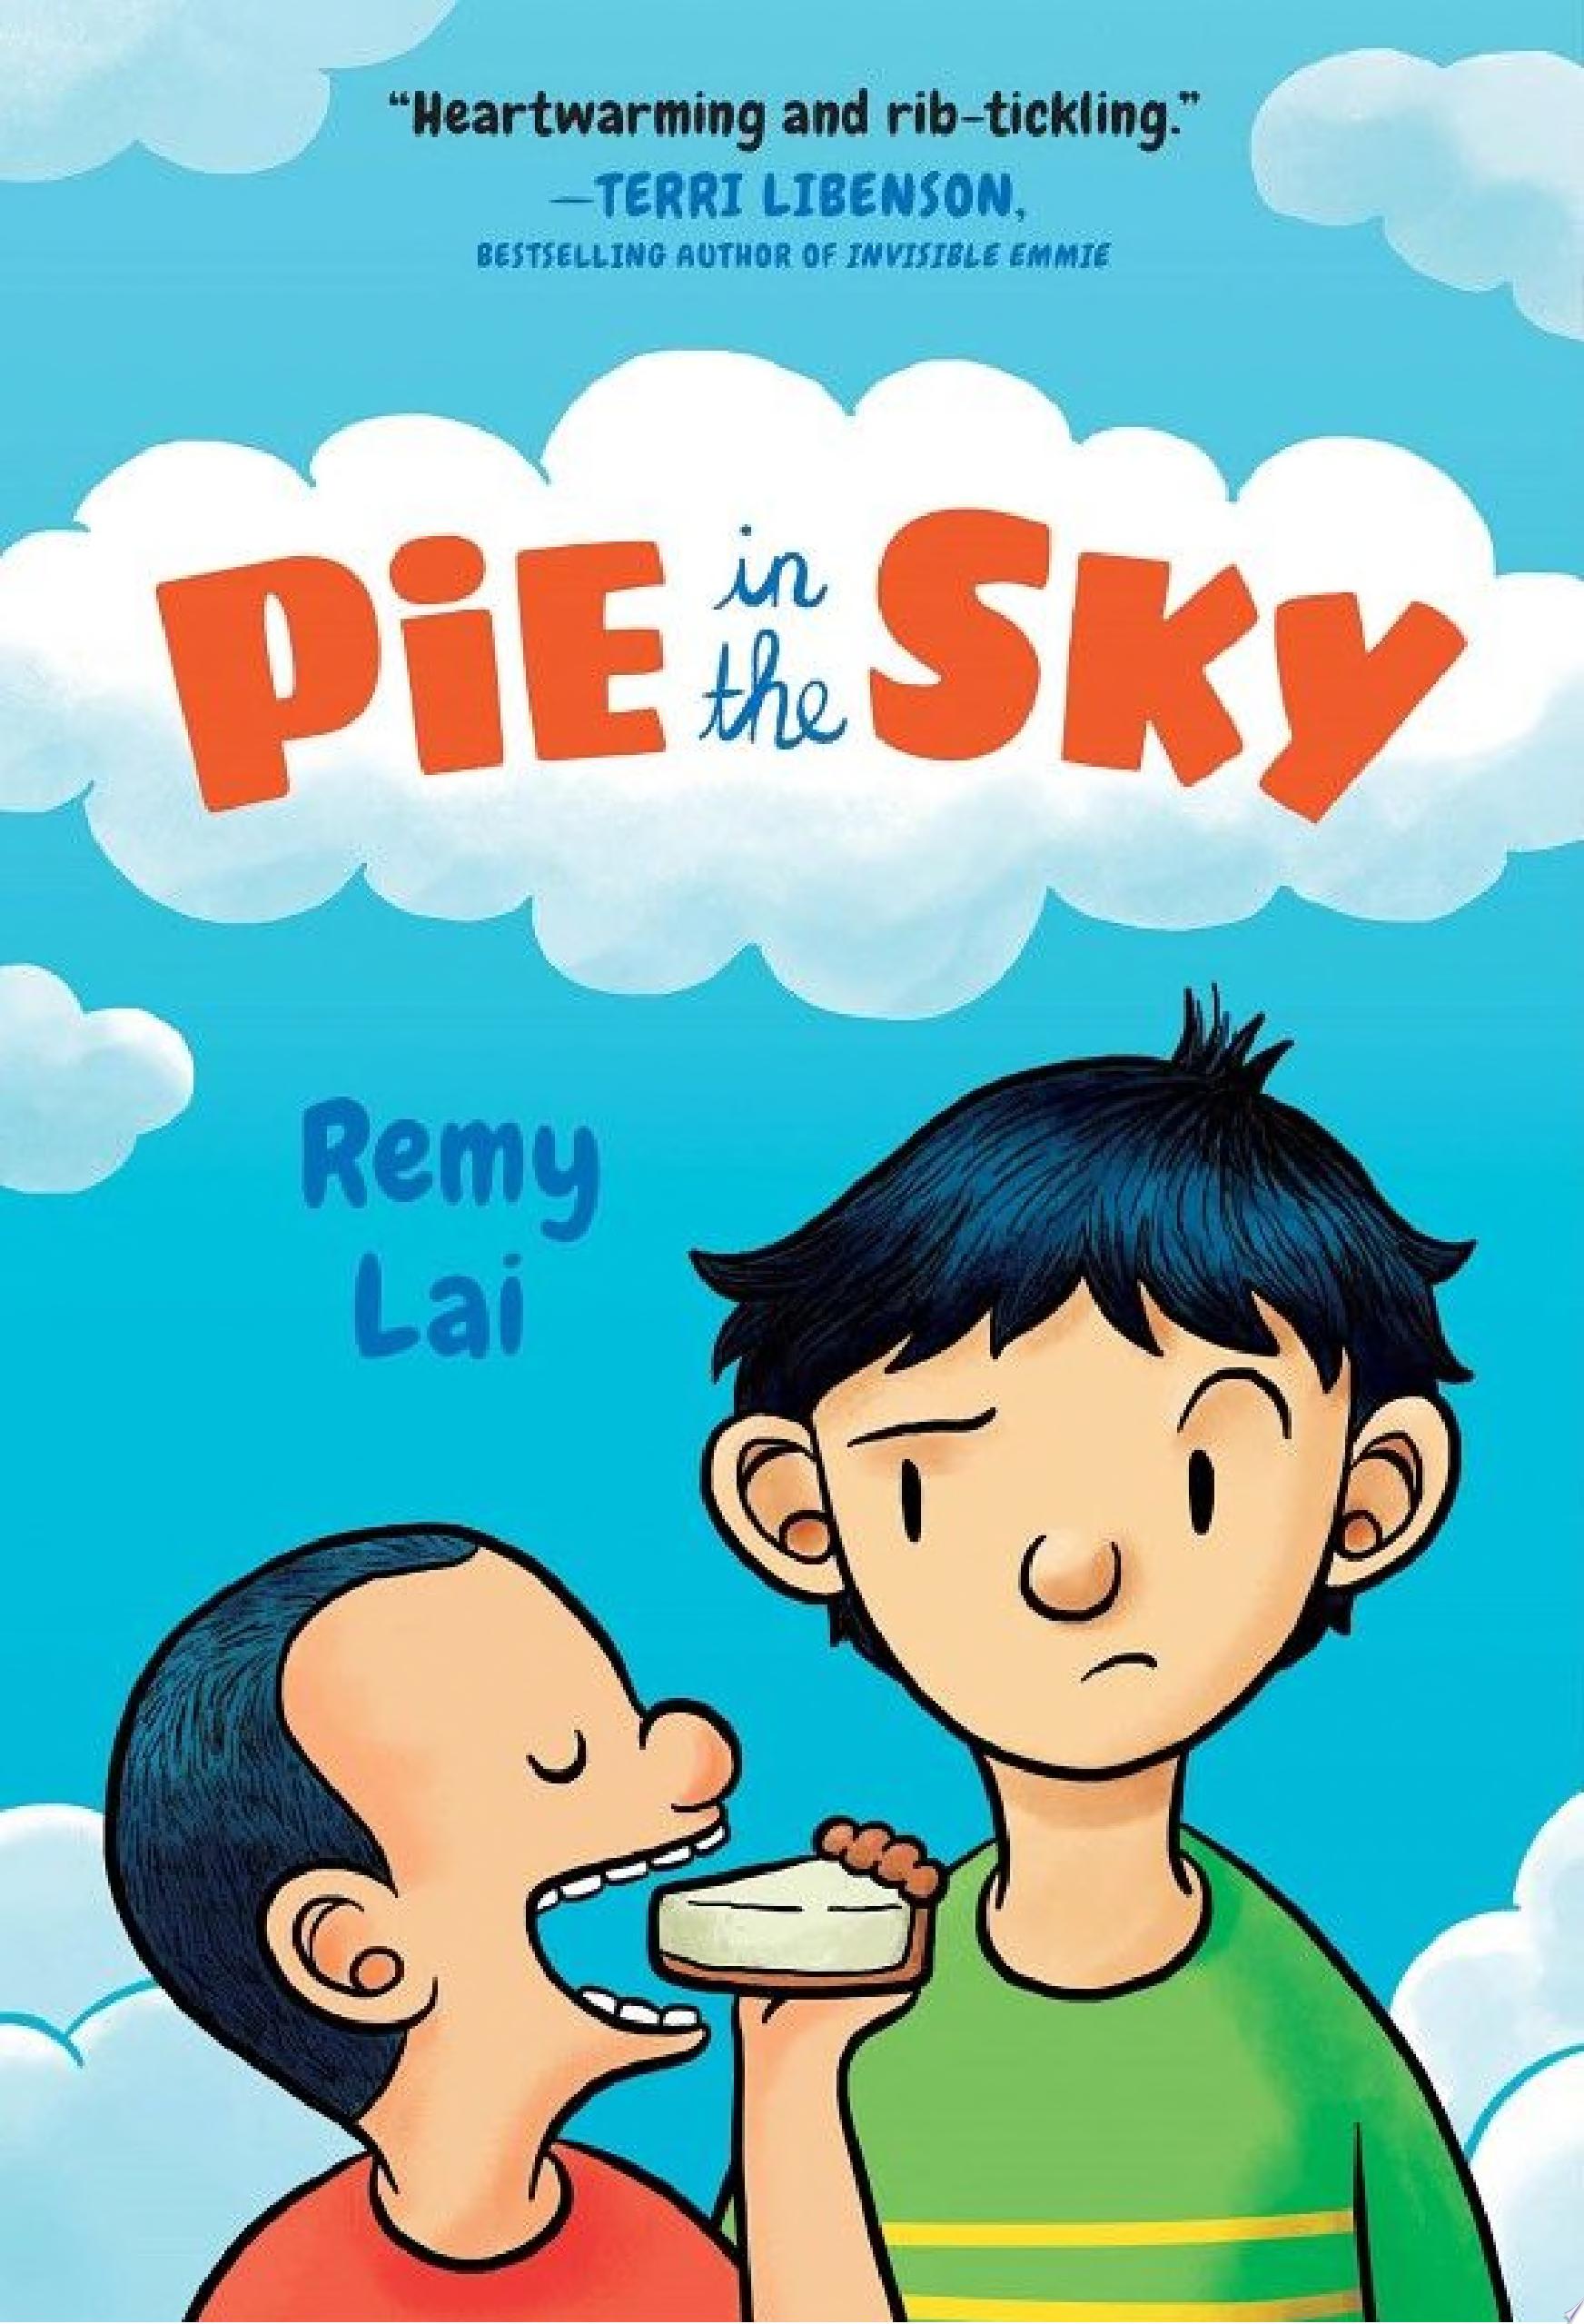 Image for "Pie in the Sky"